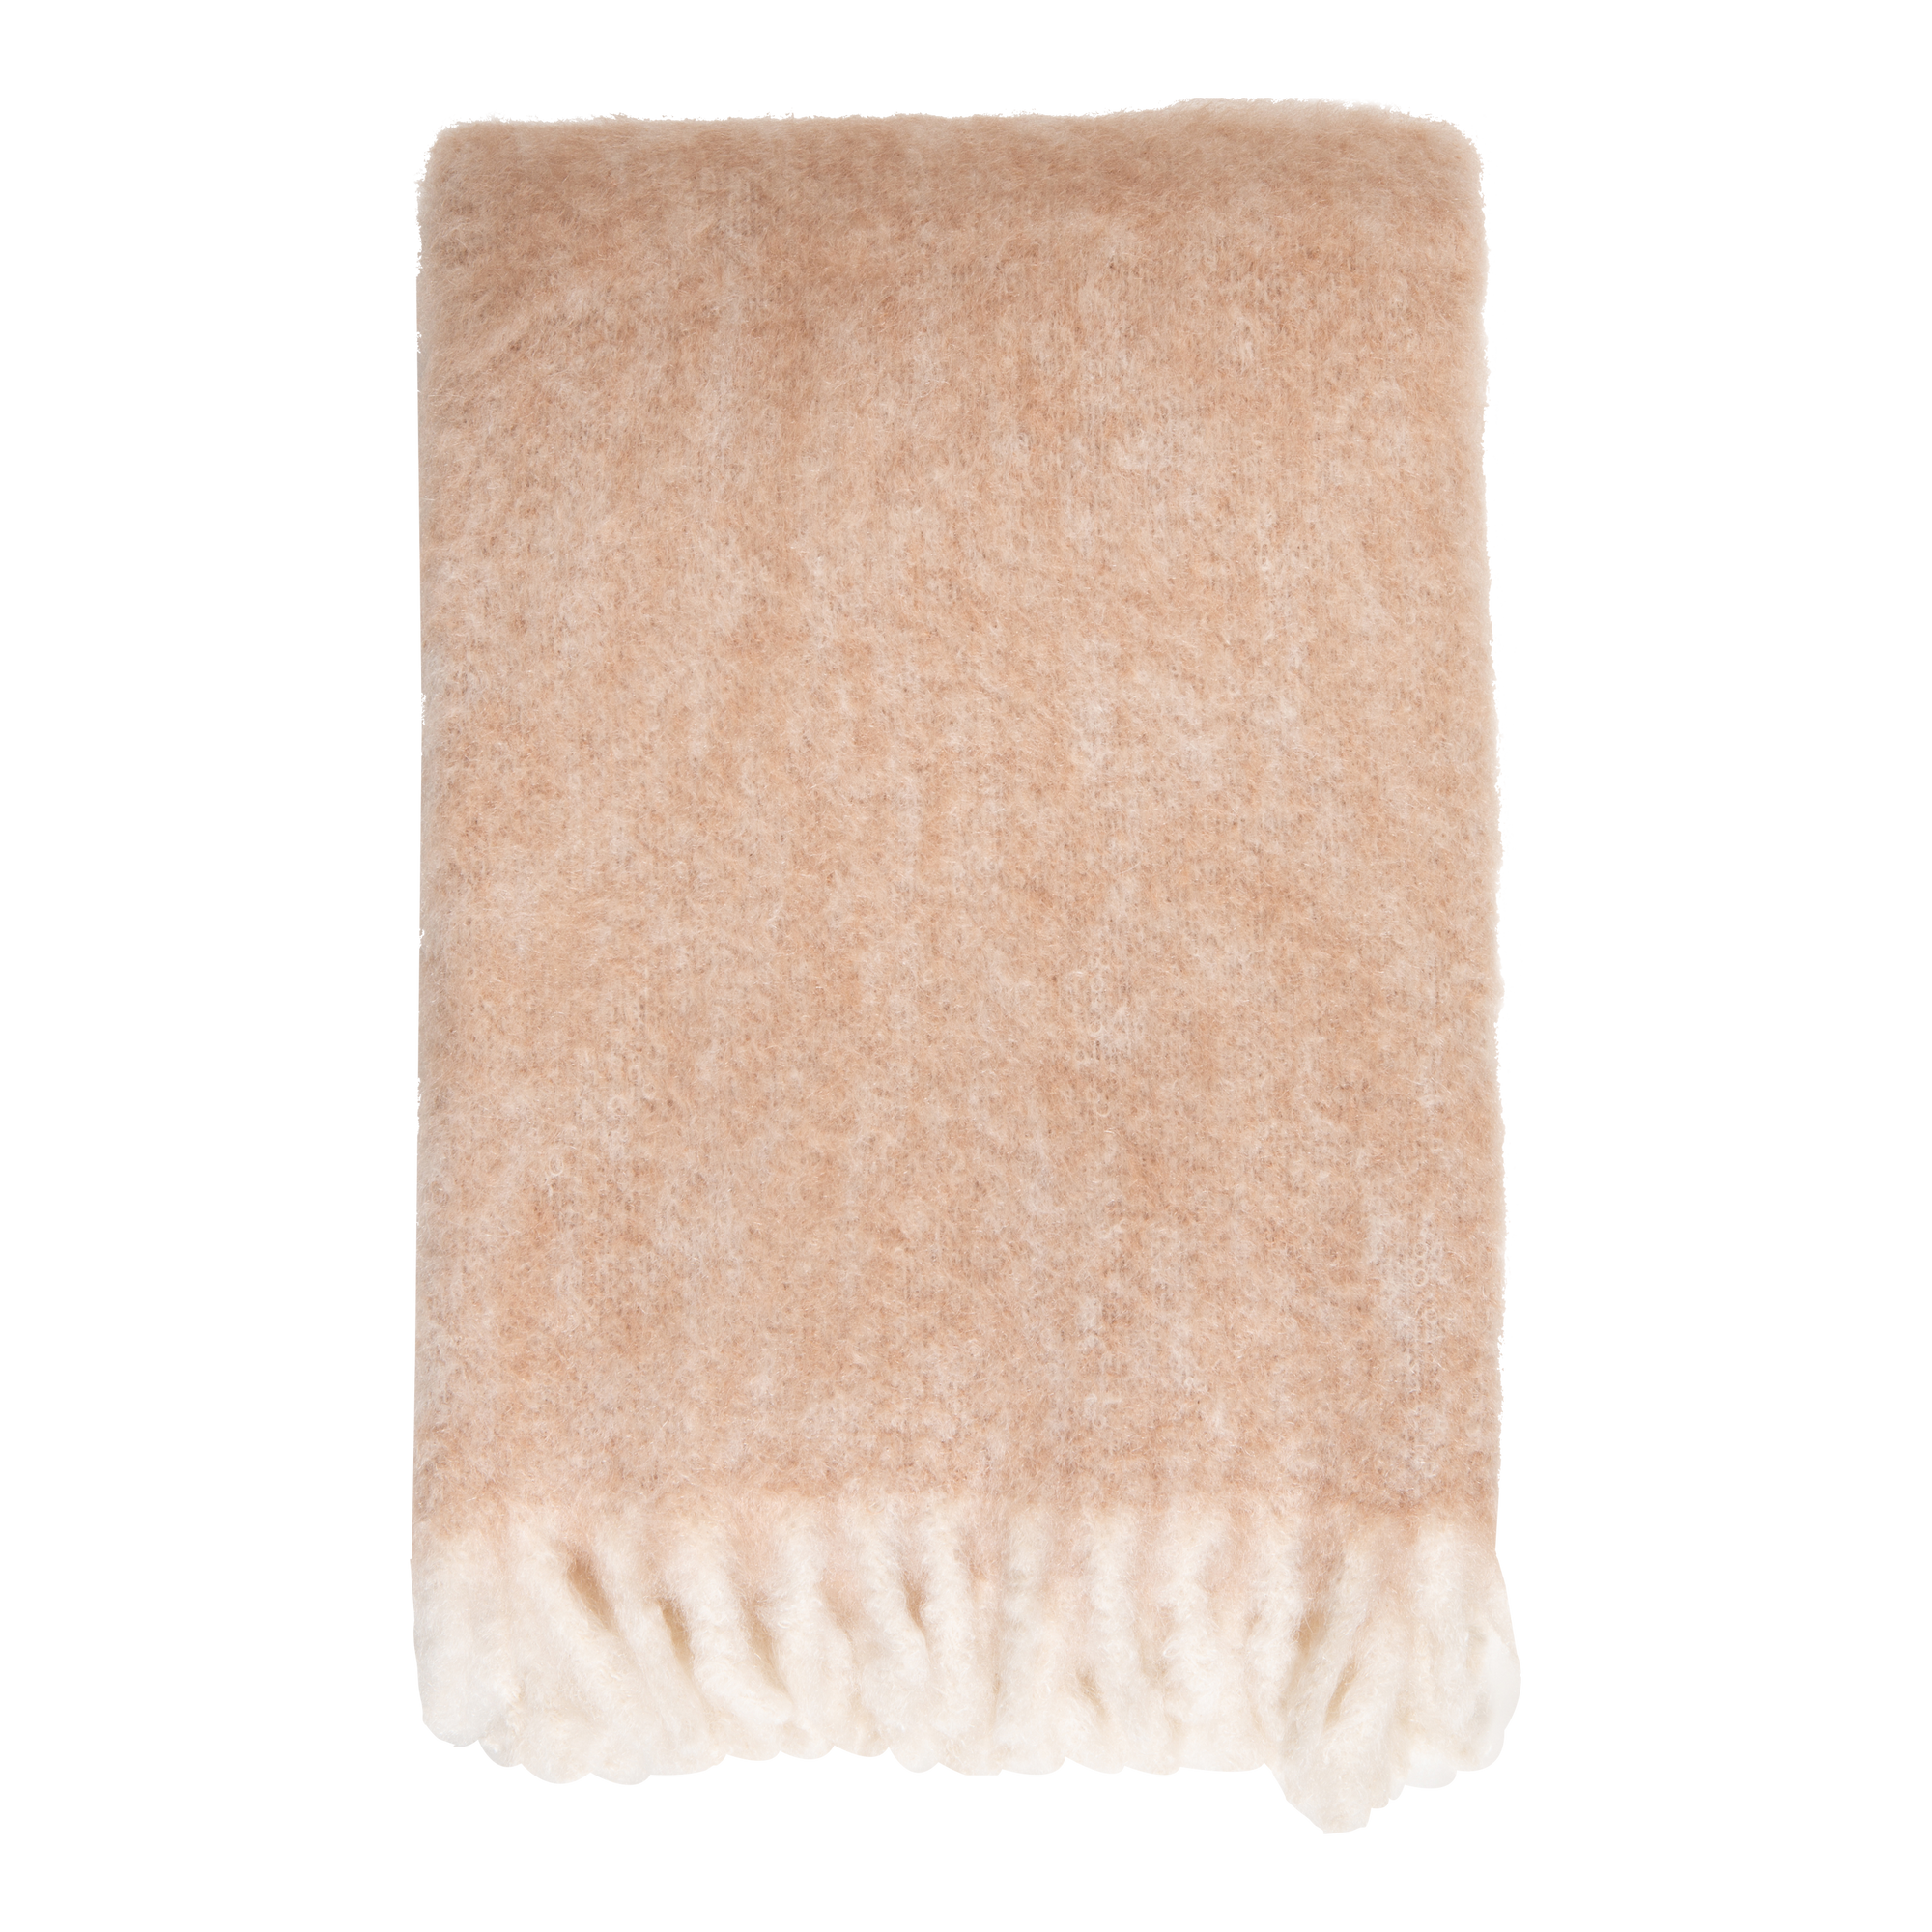 Using natural mohair from Angora goats, which is known for its soft, silky texture, the Mohair Stitched Throw is characterised by its fluffy, thin fibres that provides exceptional 